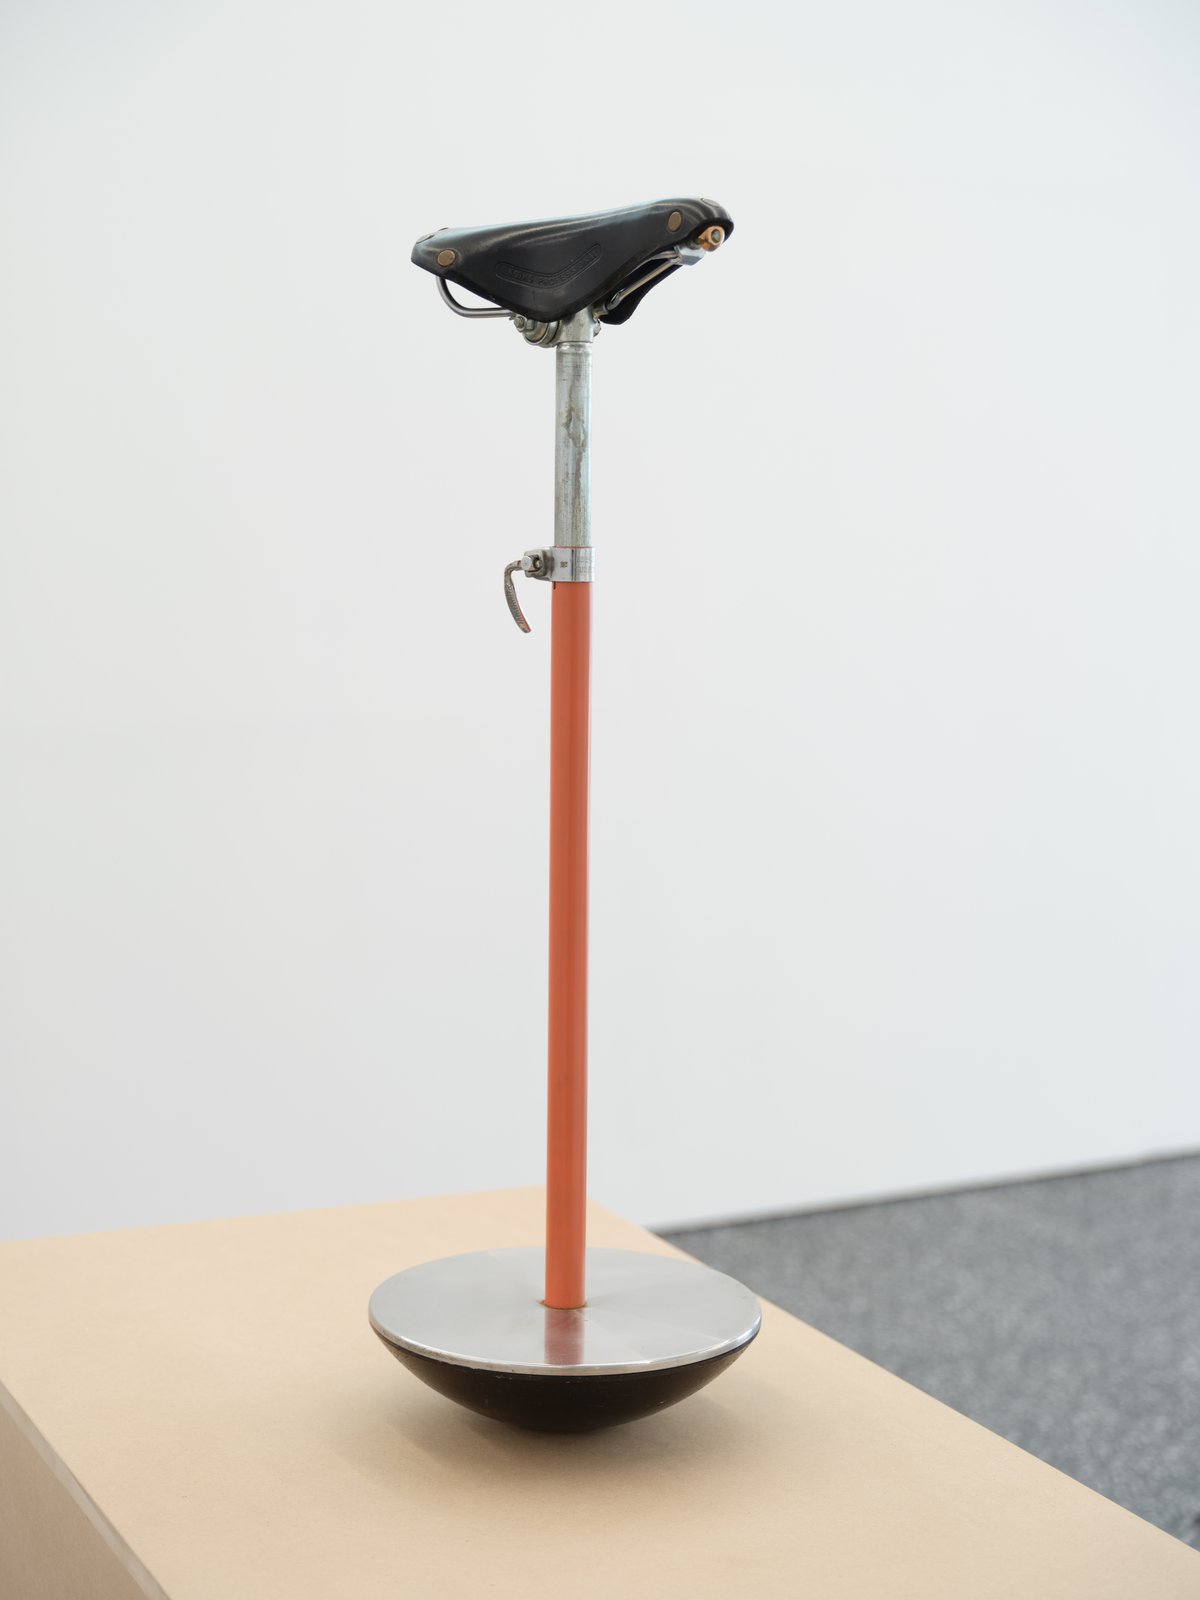 Installation view, Gaylen Gerber, Support, n.d., Sella stool, Achille and Pier Giacomo Castiglioni, manufactured by Zanotta, Italy, 1957, enameled steel, stainless steel, leather, chrome plated steel, 76 x 28 x 30 cm (30 x 11 x 12 inches)